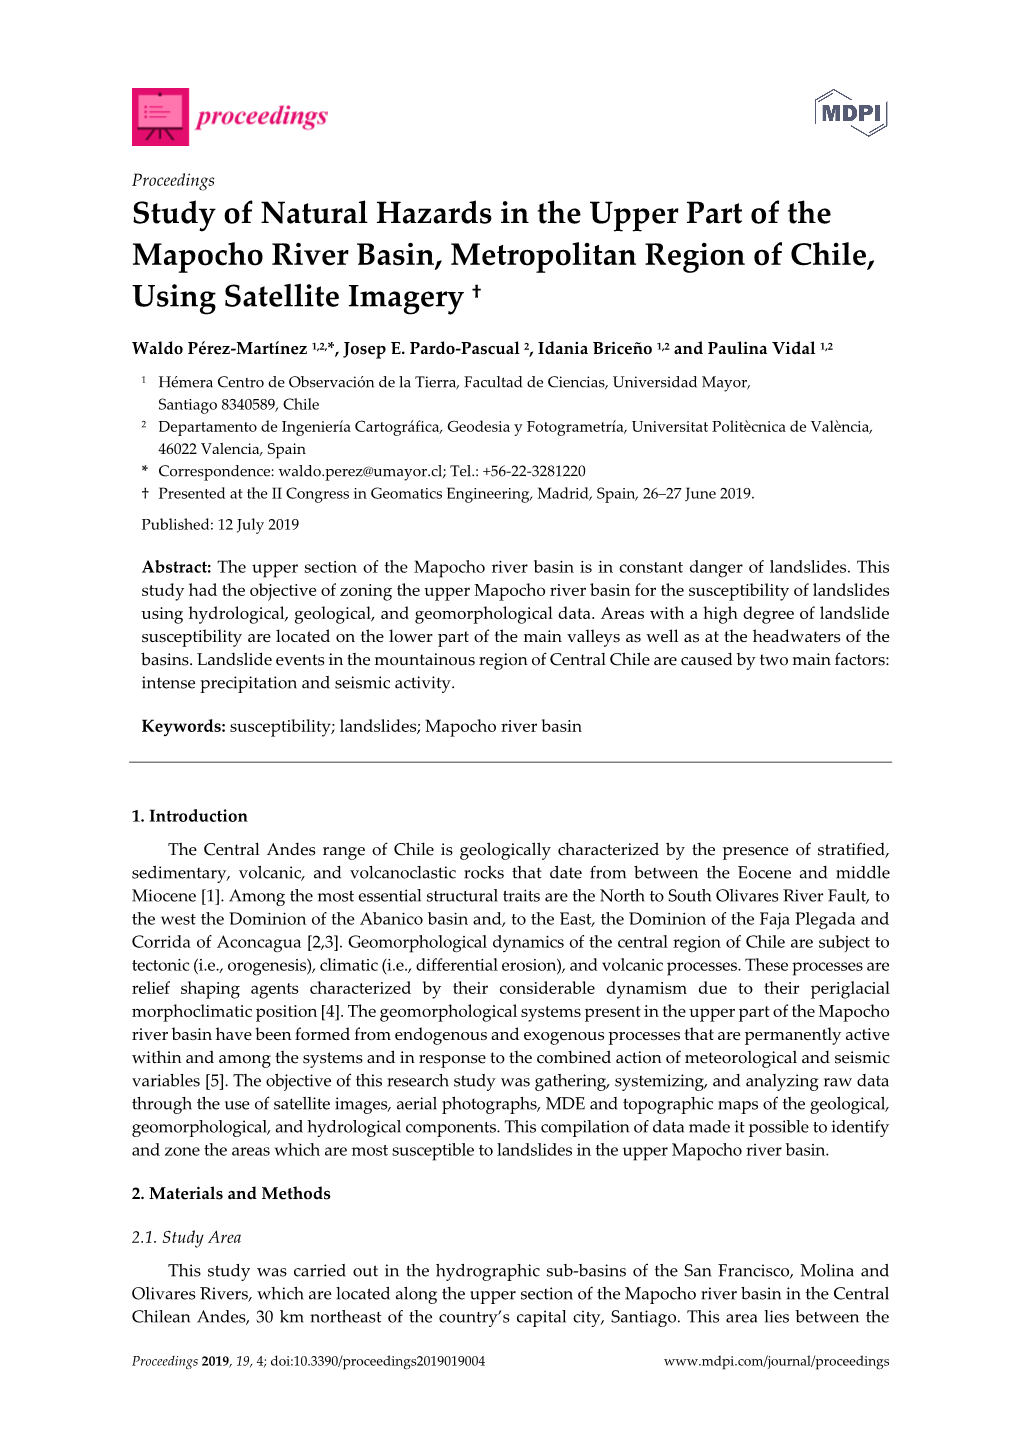 Study of Natural Hazards in the Upper Part of the Mapocho River Basin, Metropolitan Region of Chile, Using Satellite Imagery †